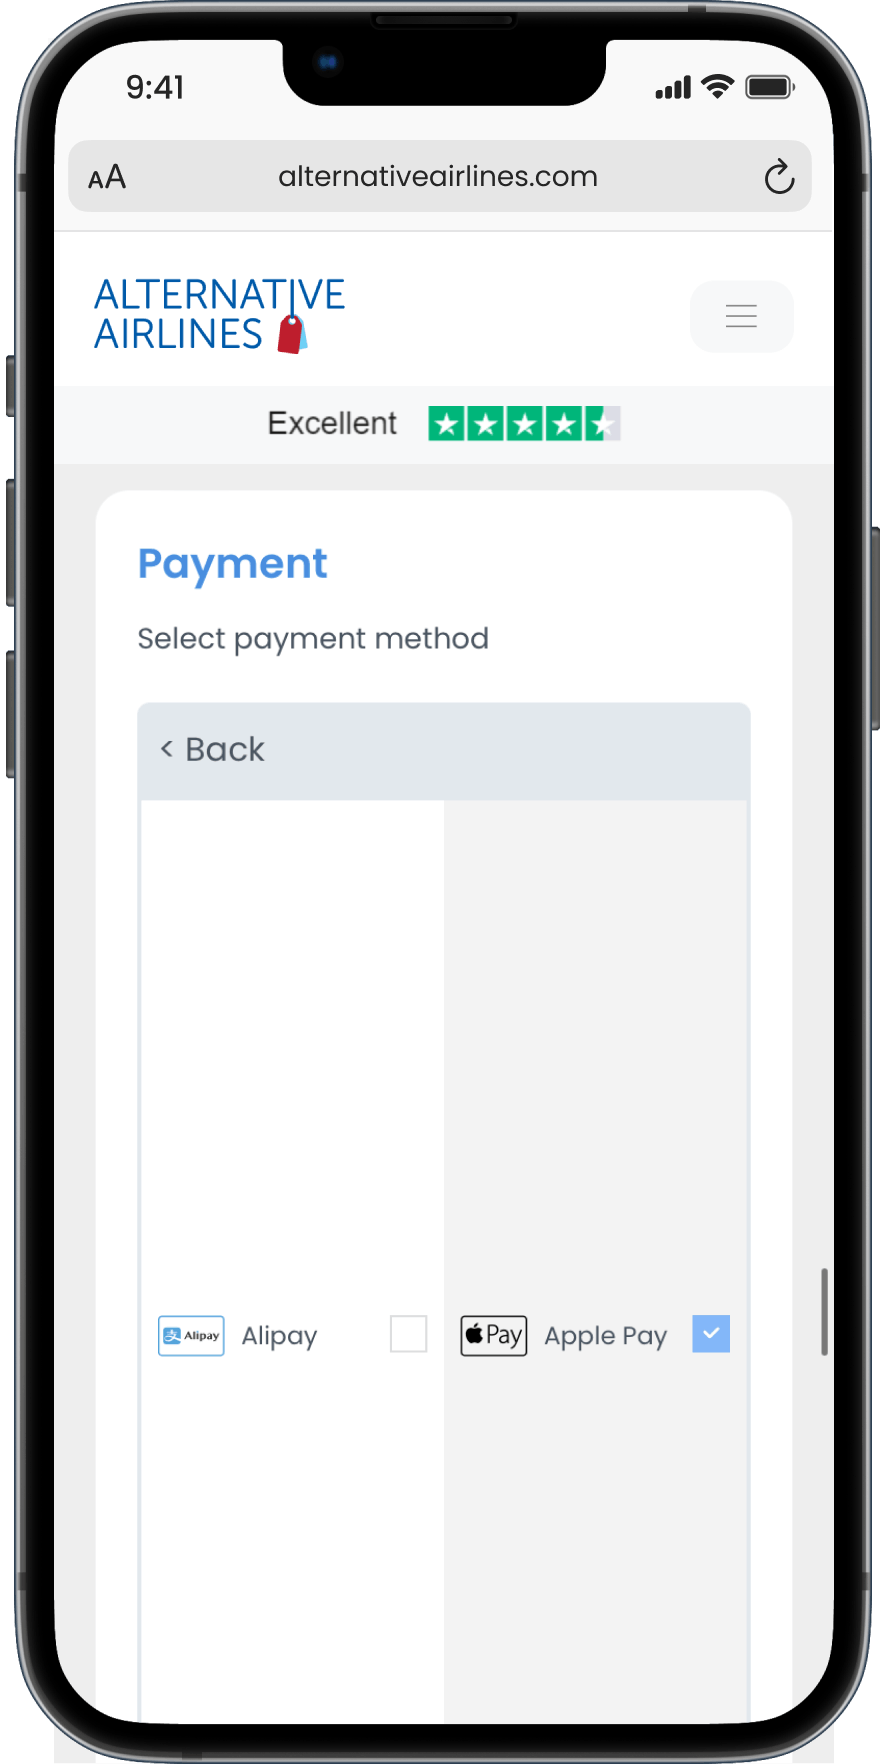 Step 3 - Select Apple Pay